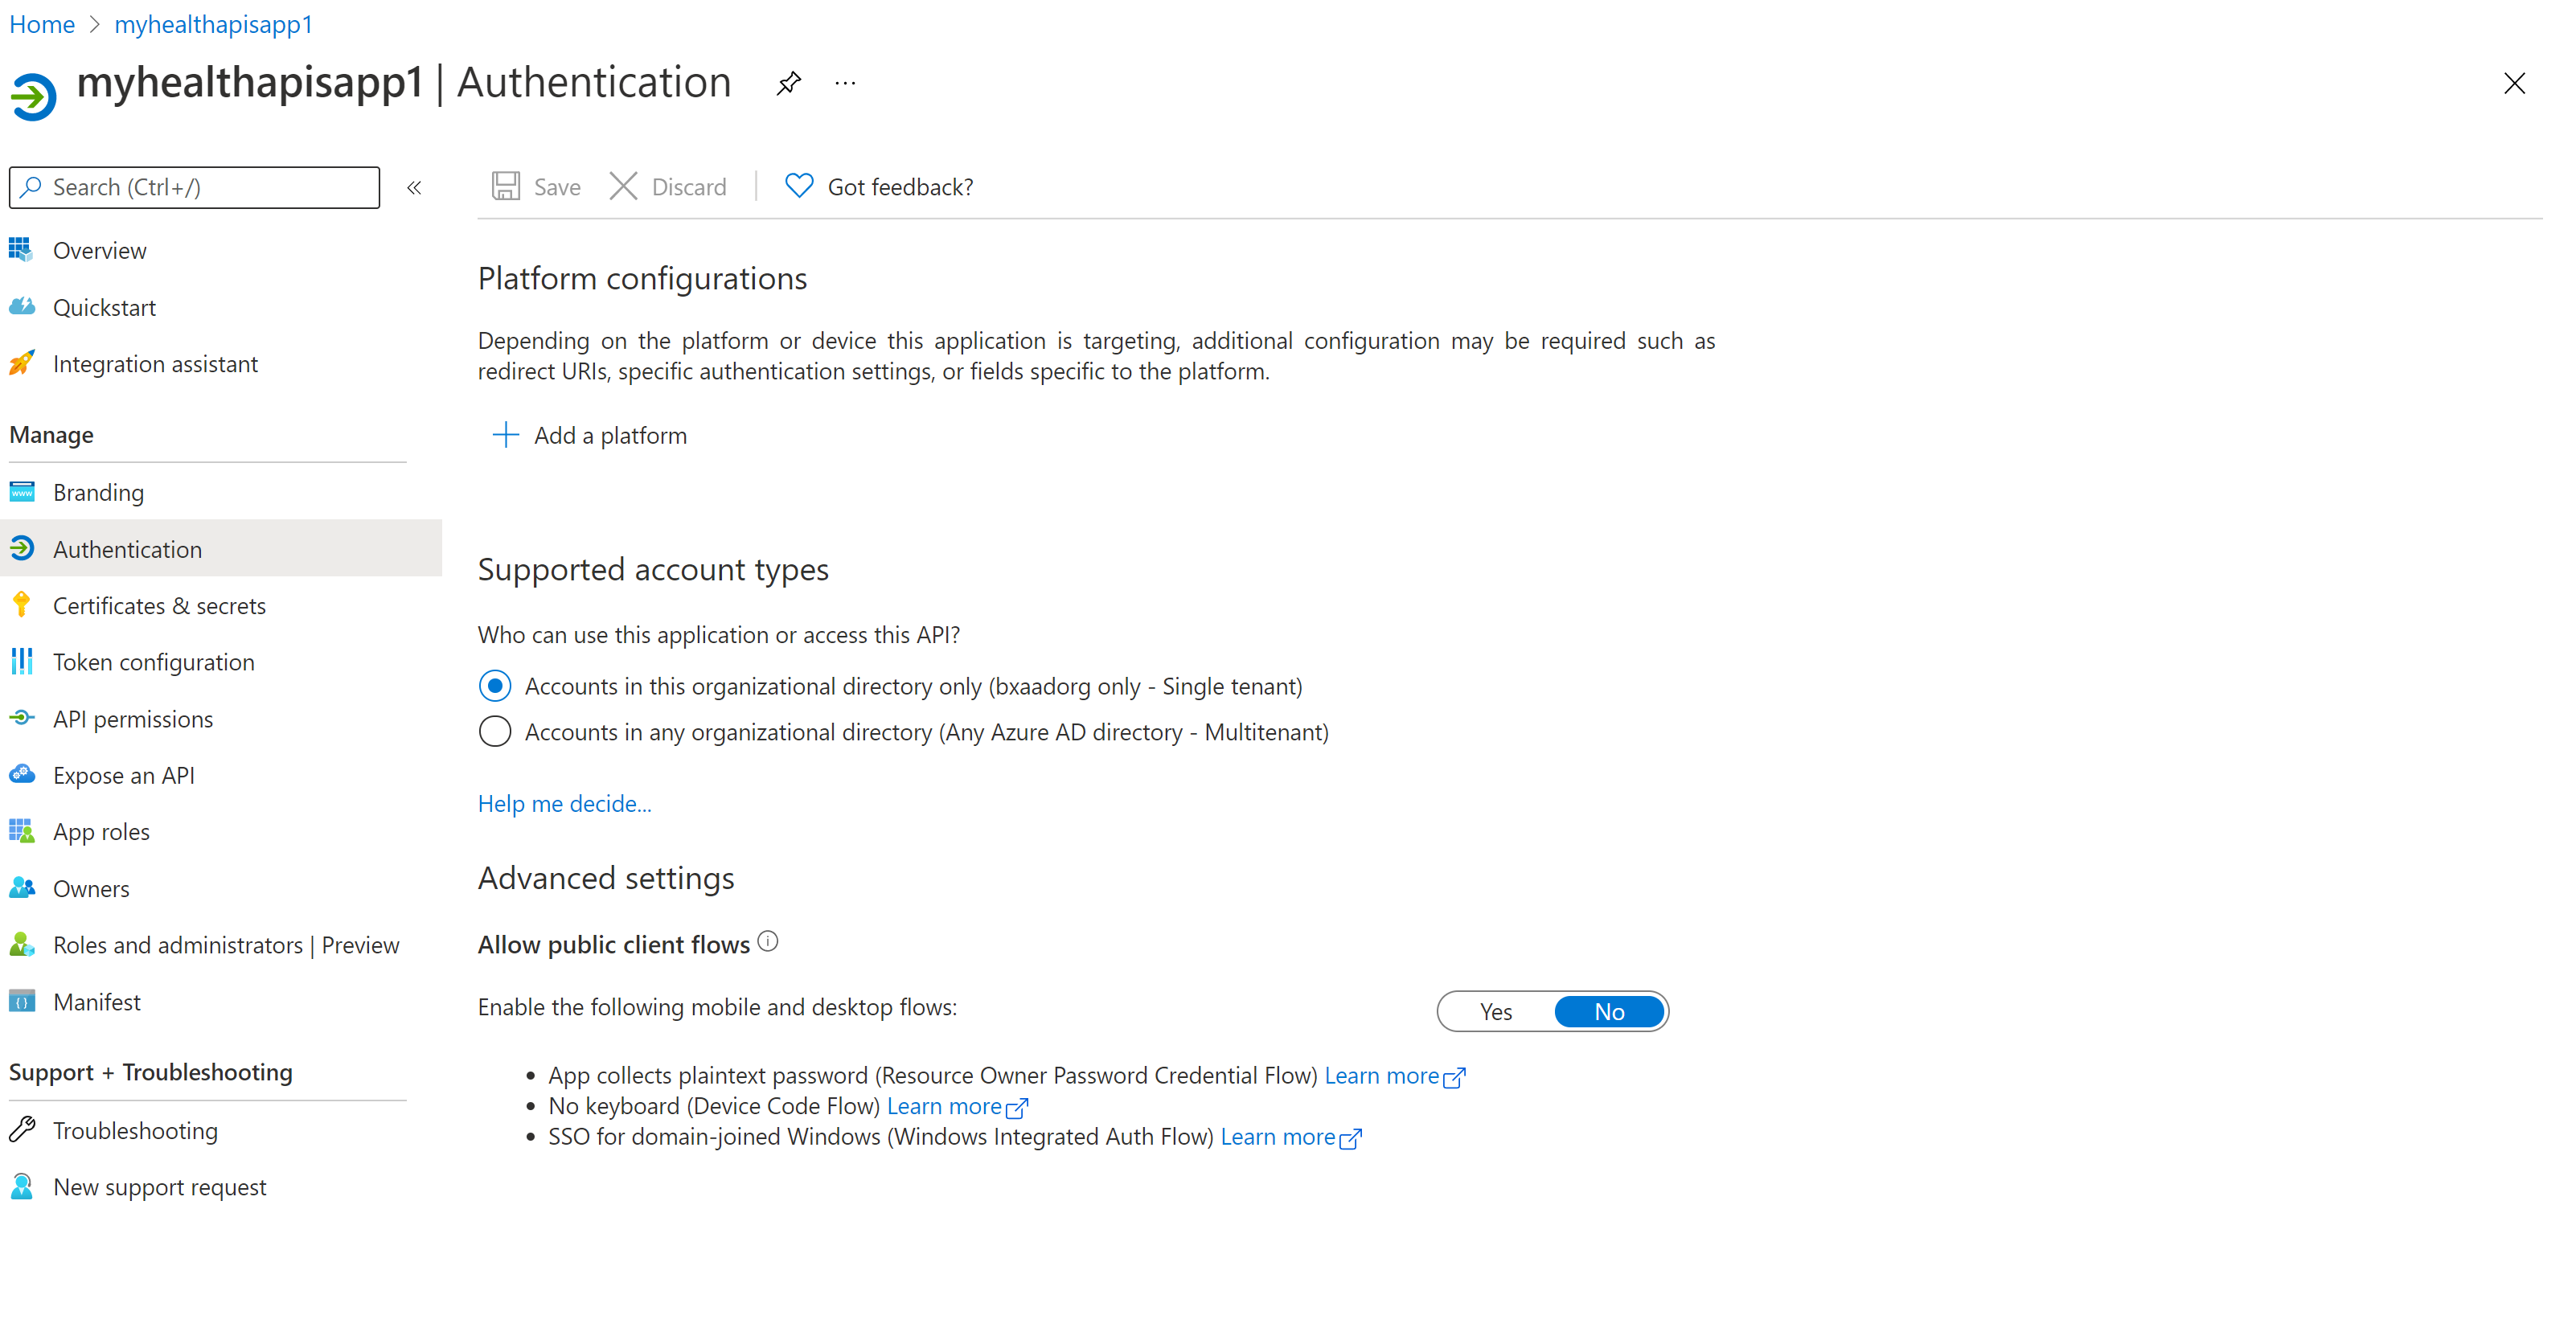 _images/Azure_AppRegistration_AuthenticationSetting_1.png